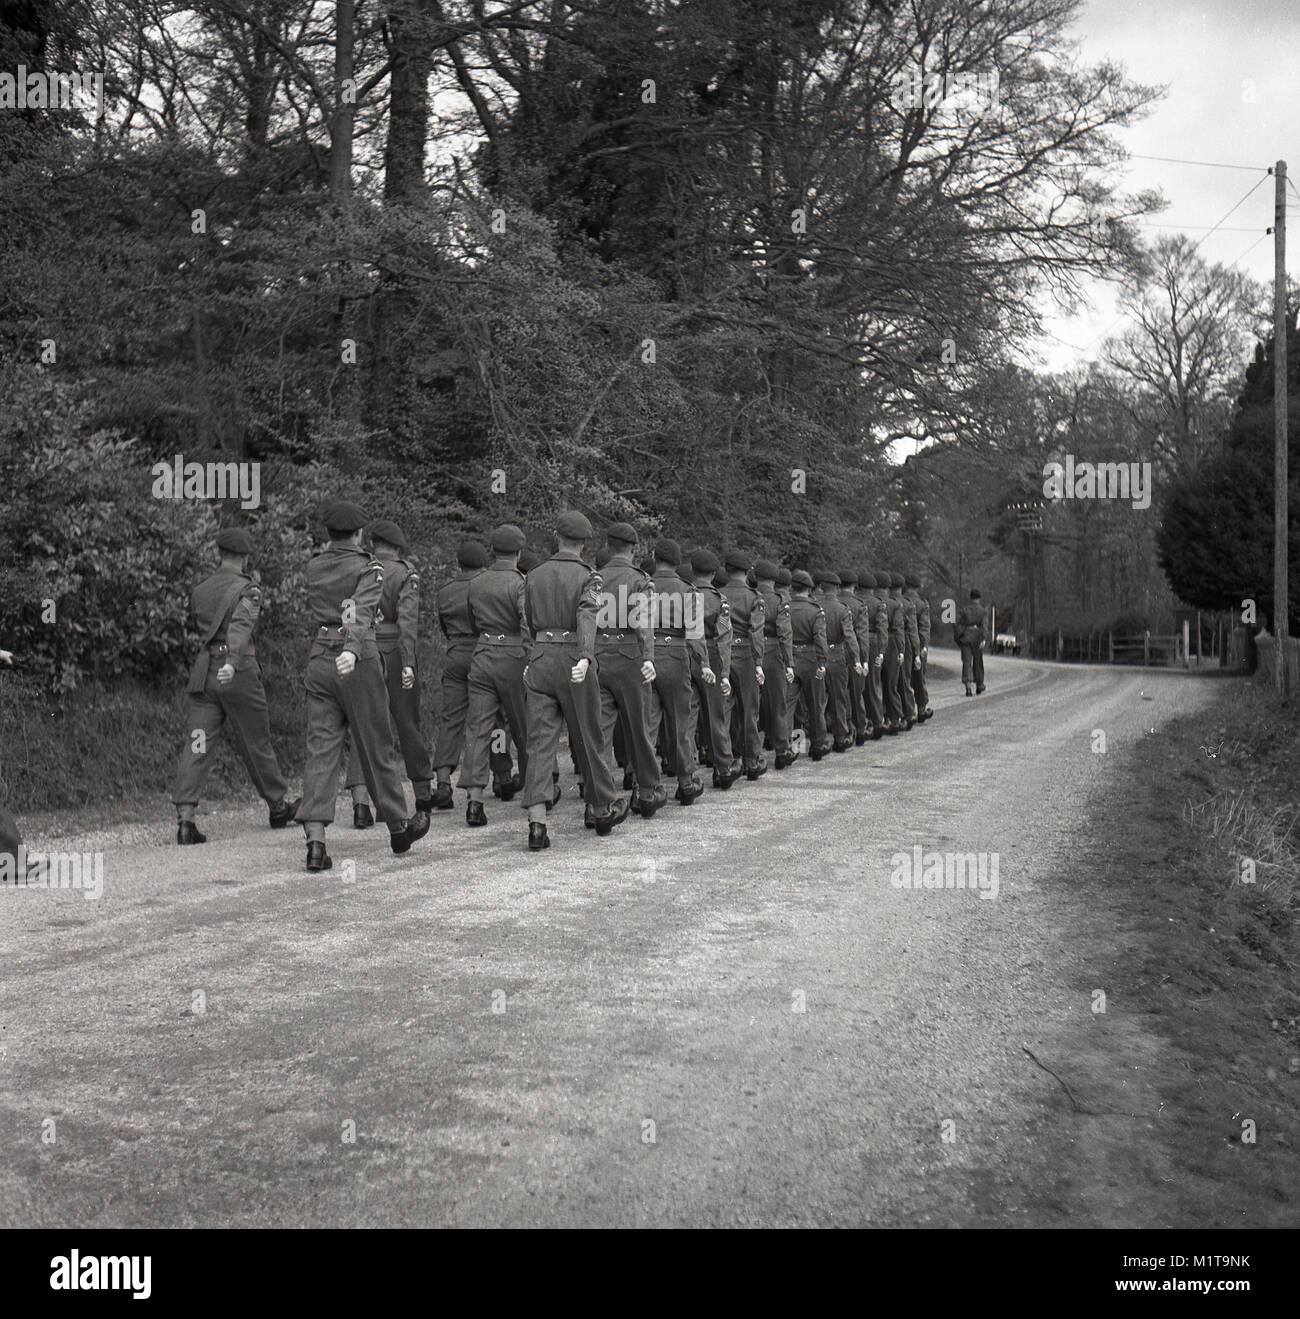 1955, historical, Bucks, England, a troop of British soldiers on a training drill outdoors, the servicemen are marching on a gravel track through a wooded area. Stock Photo